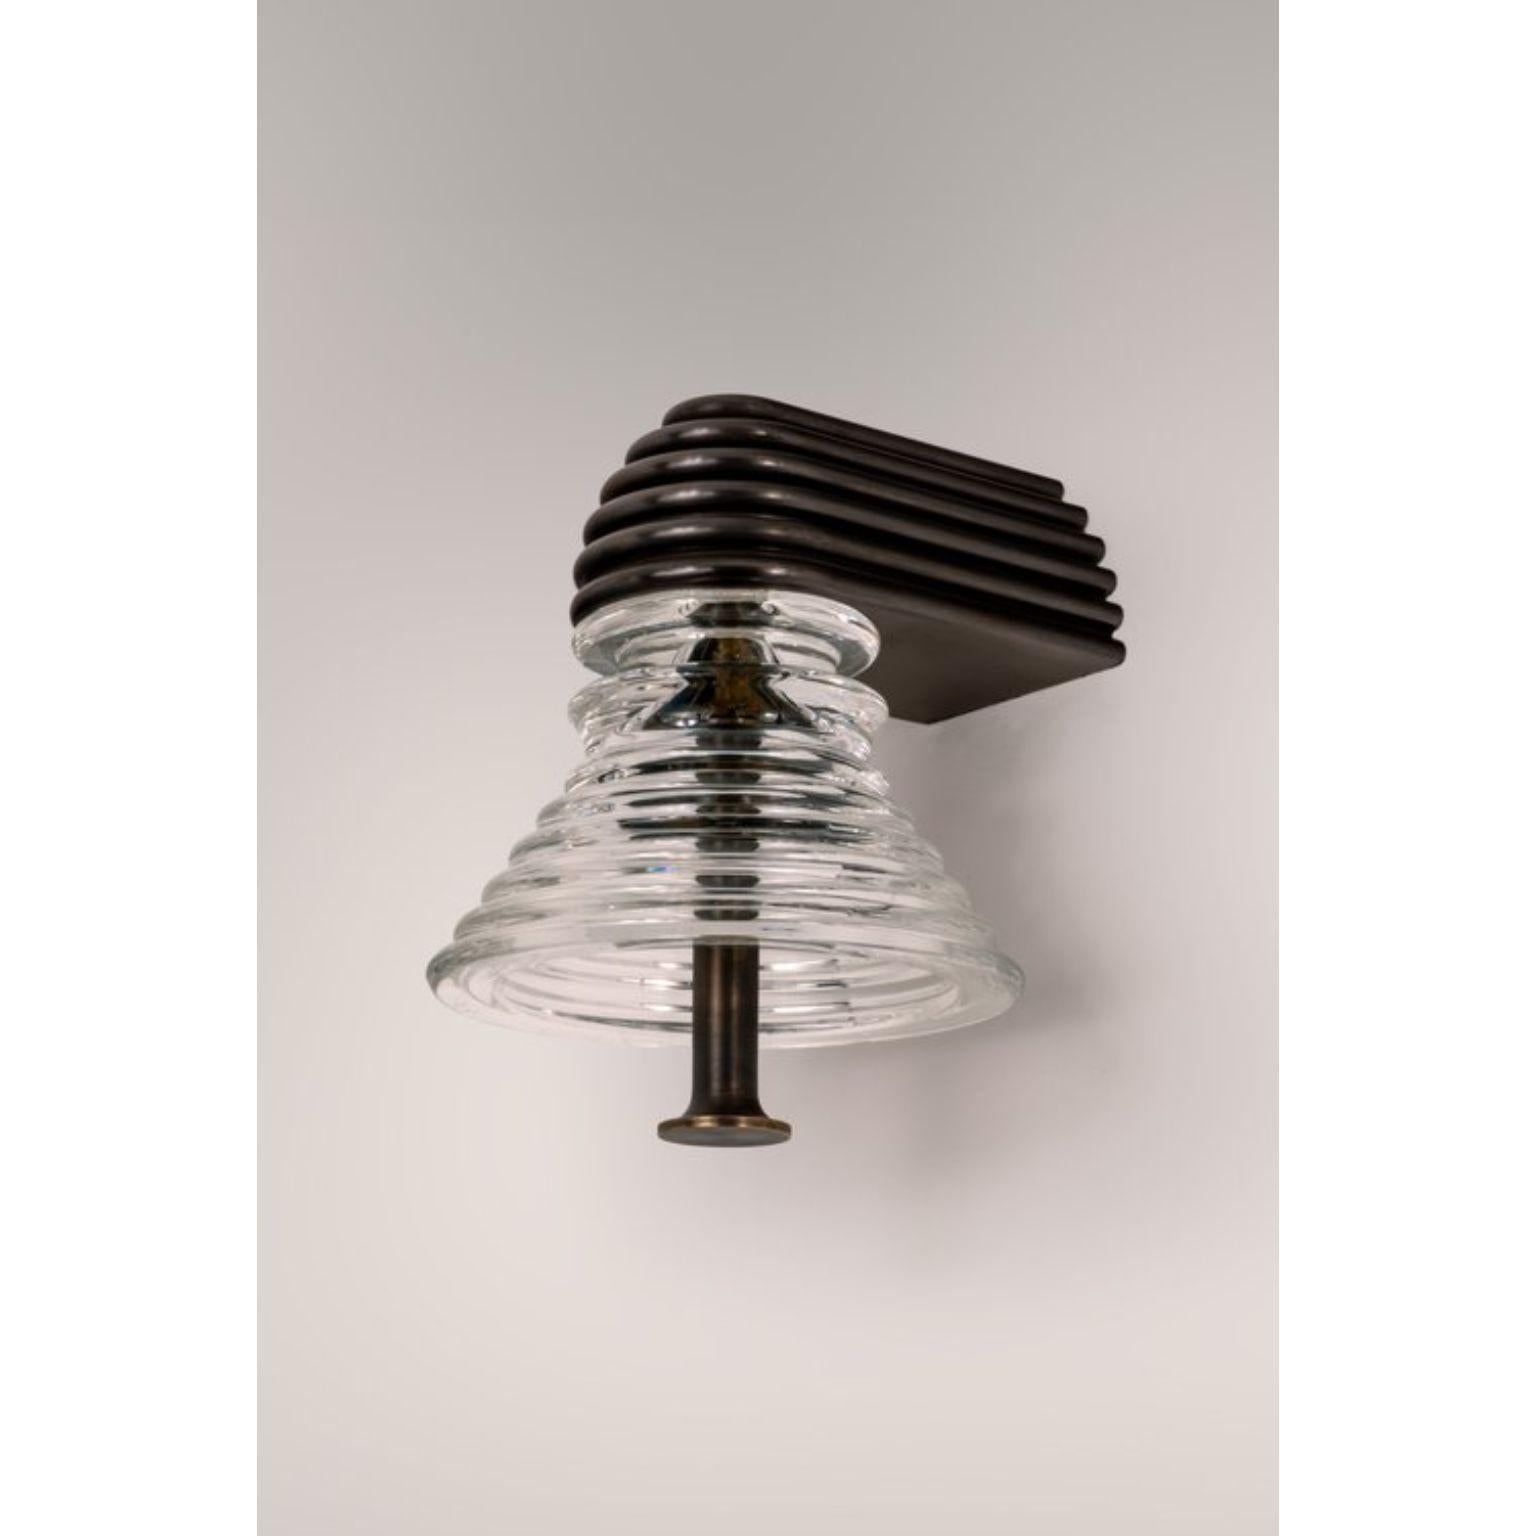 Insulator A Clear Glass and Dark Brass Sconce by Novocastrian
Dimensions: Ø 14 x H 21 cm.
Materials: Clear glass and dark brass.  

All products are available in custom dimensions and finishes. Rods can be cut to length or provided at longer lengths